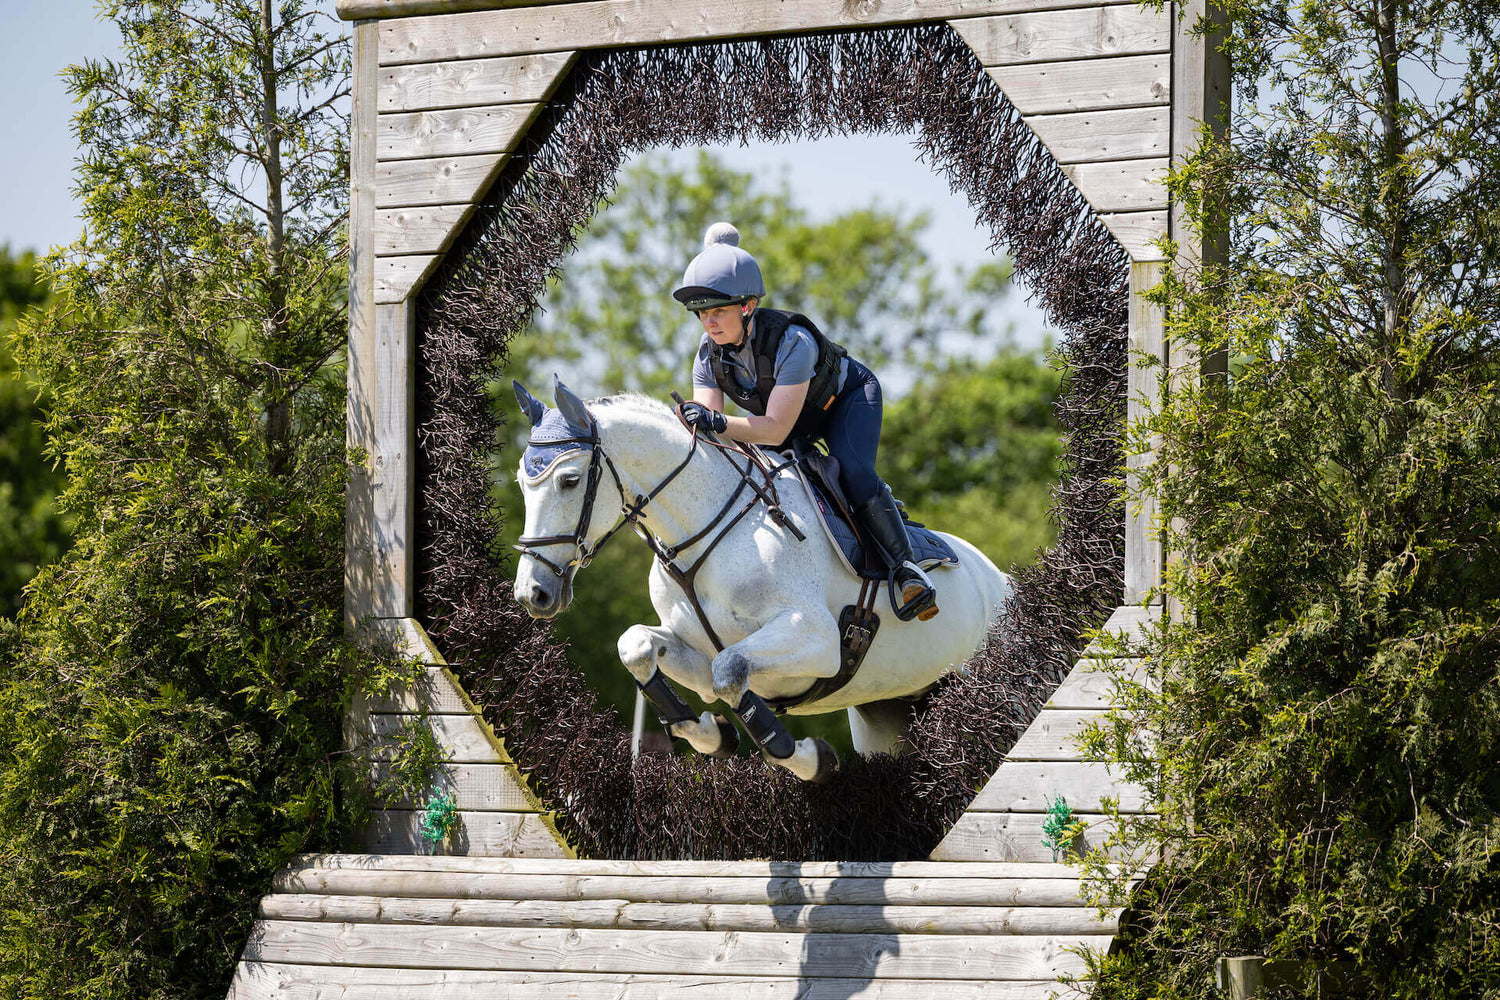 Hourse jumping and a boy riding